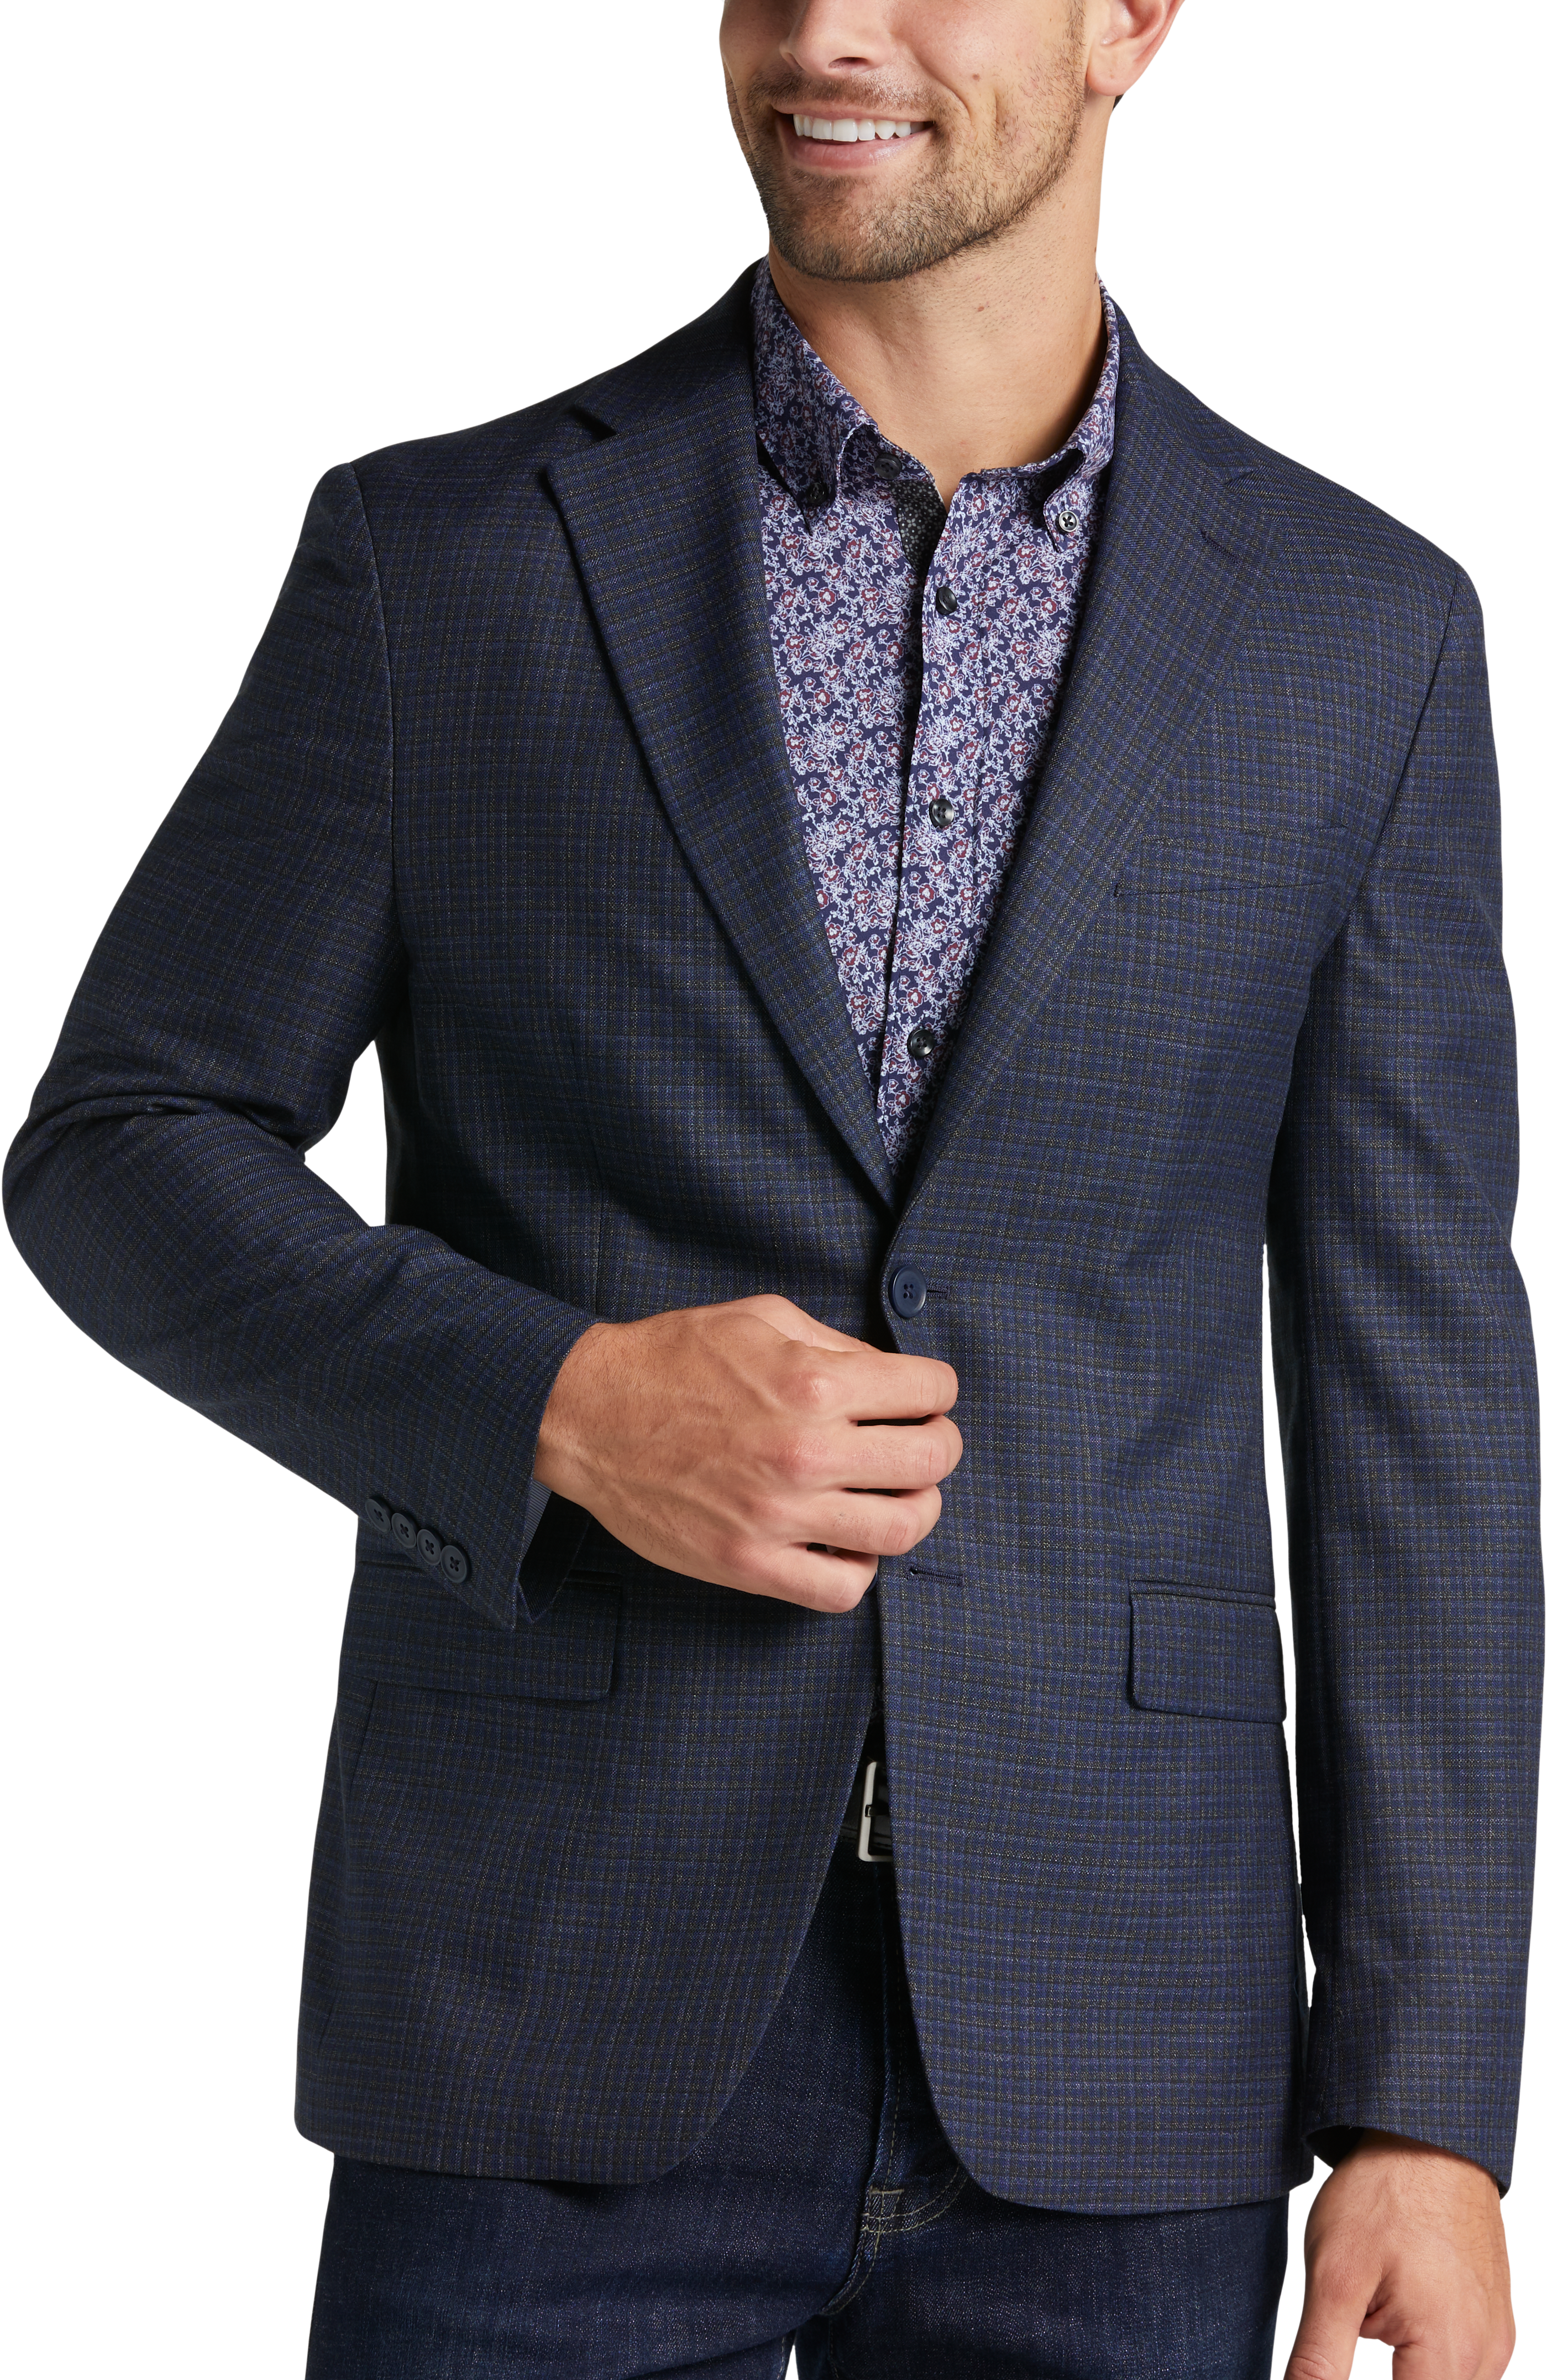 Michael Strahan Classic Fit Sport Coat, Blue and Gold Check - Men's ...